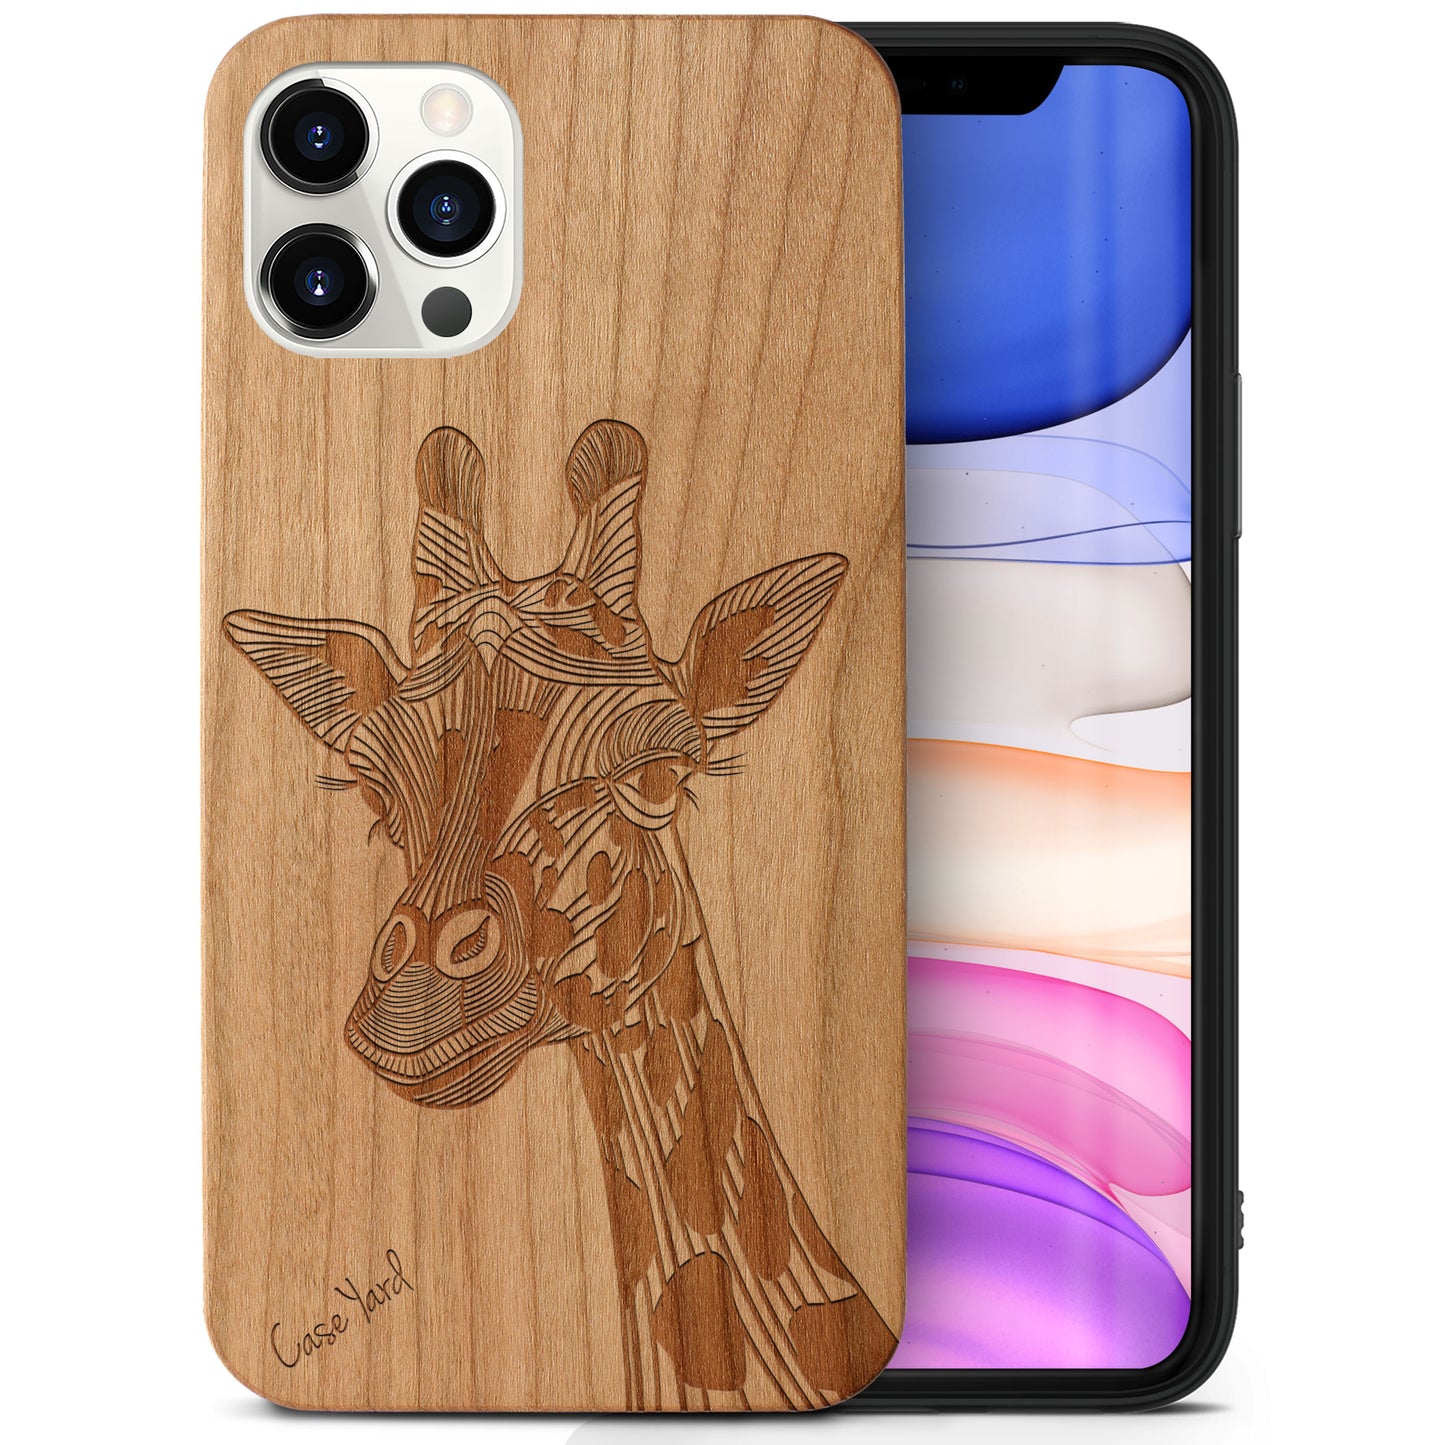 Wooden Cell Phone Case Cover, Laser Engraved case for iPhone & Samsung phone Giraffe Wood Design